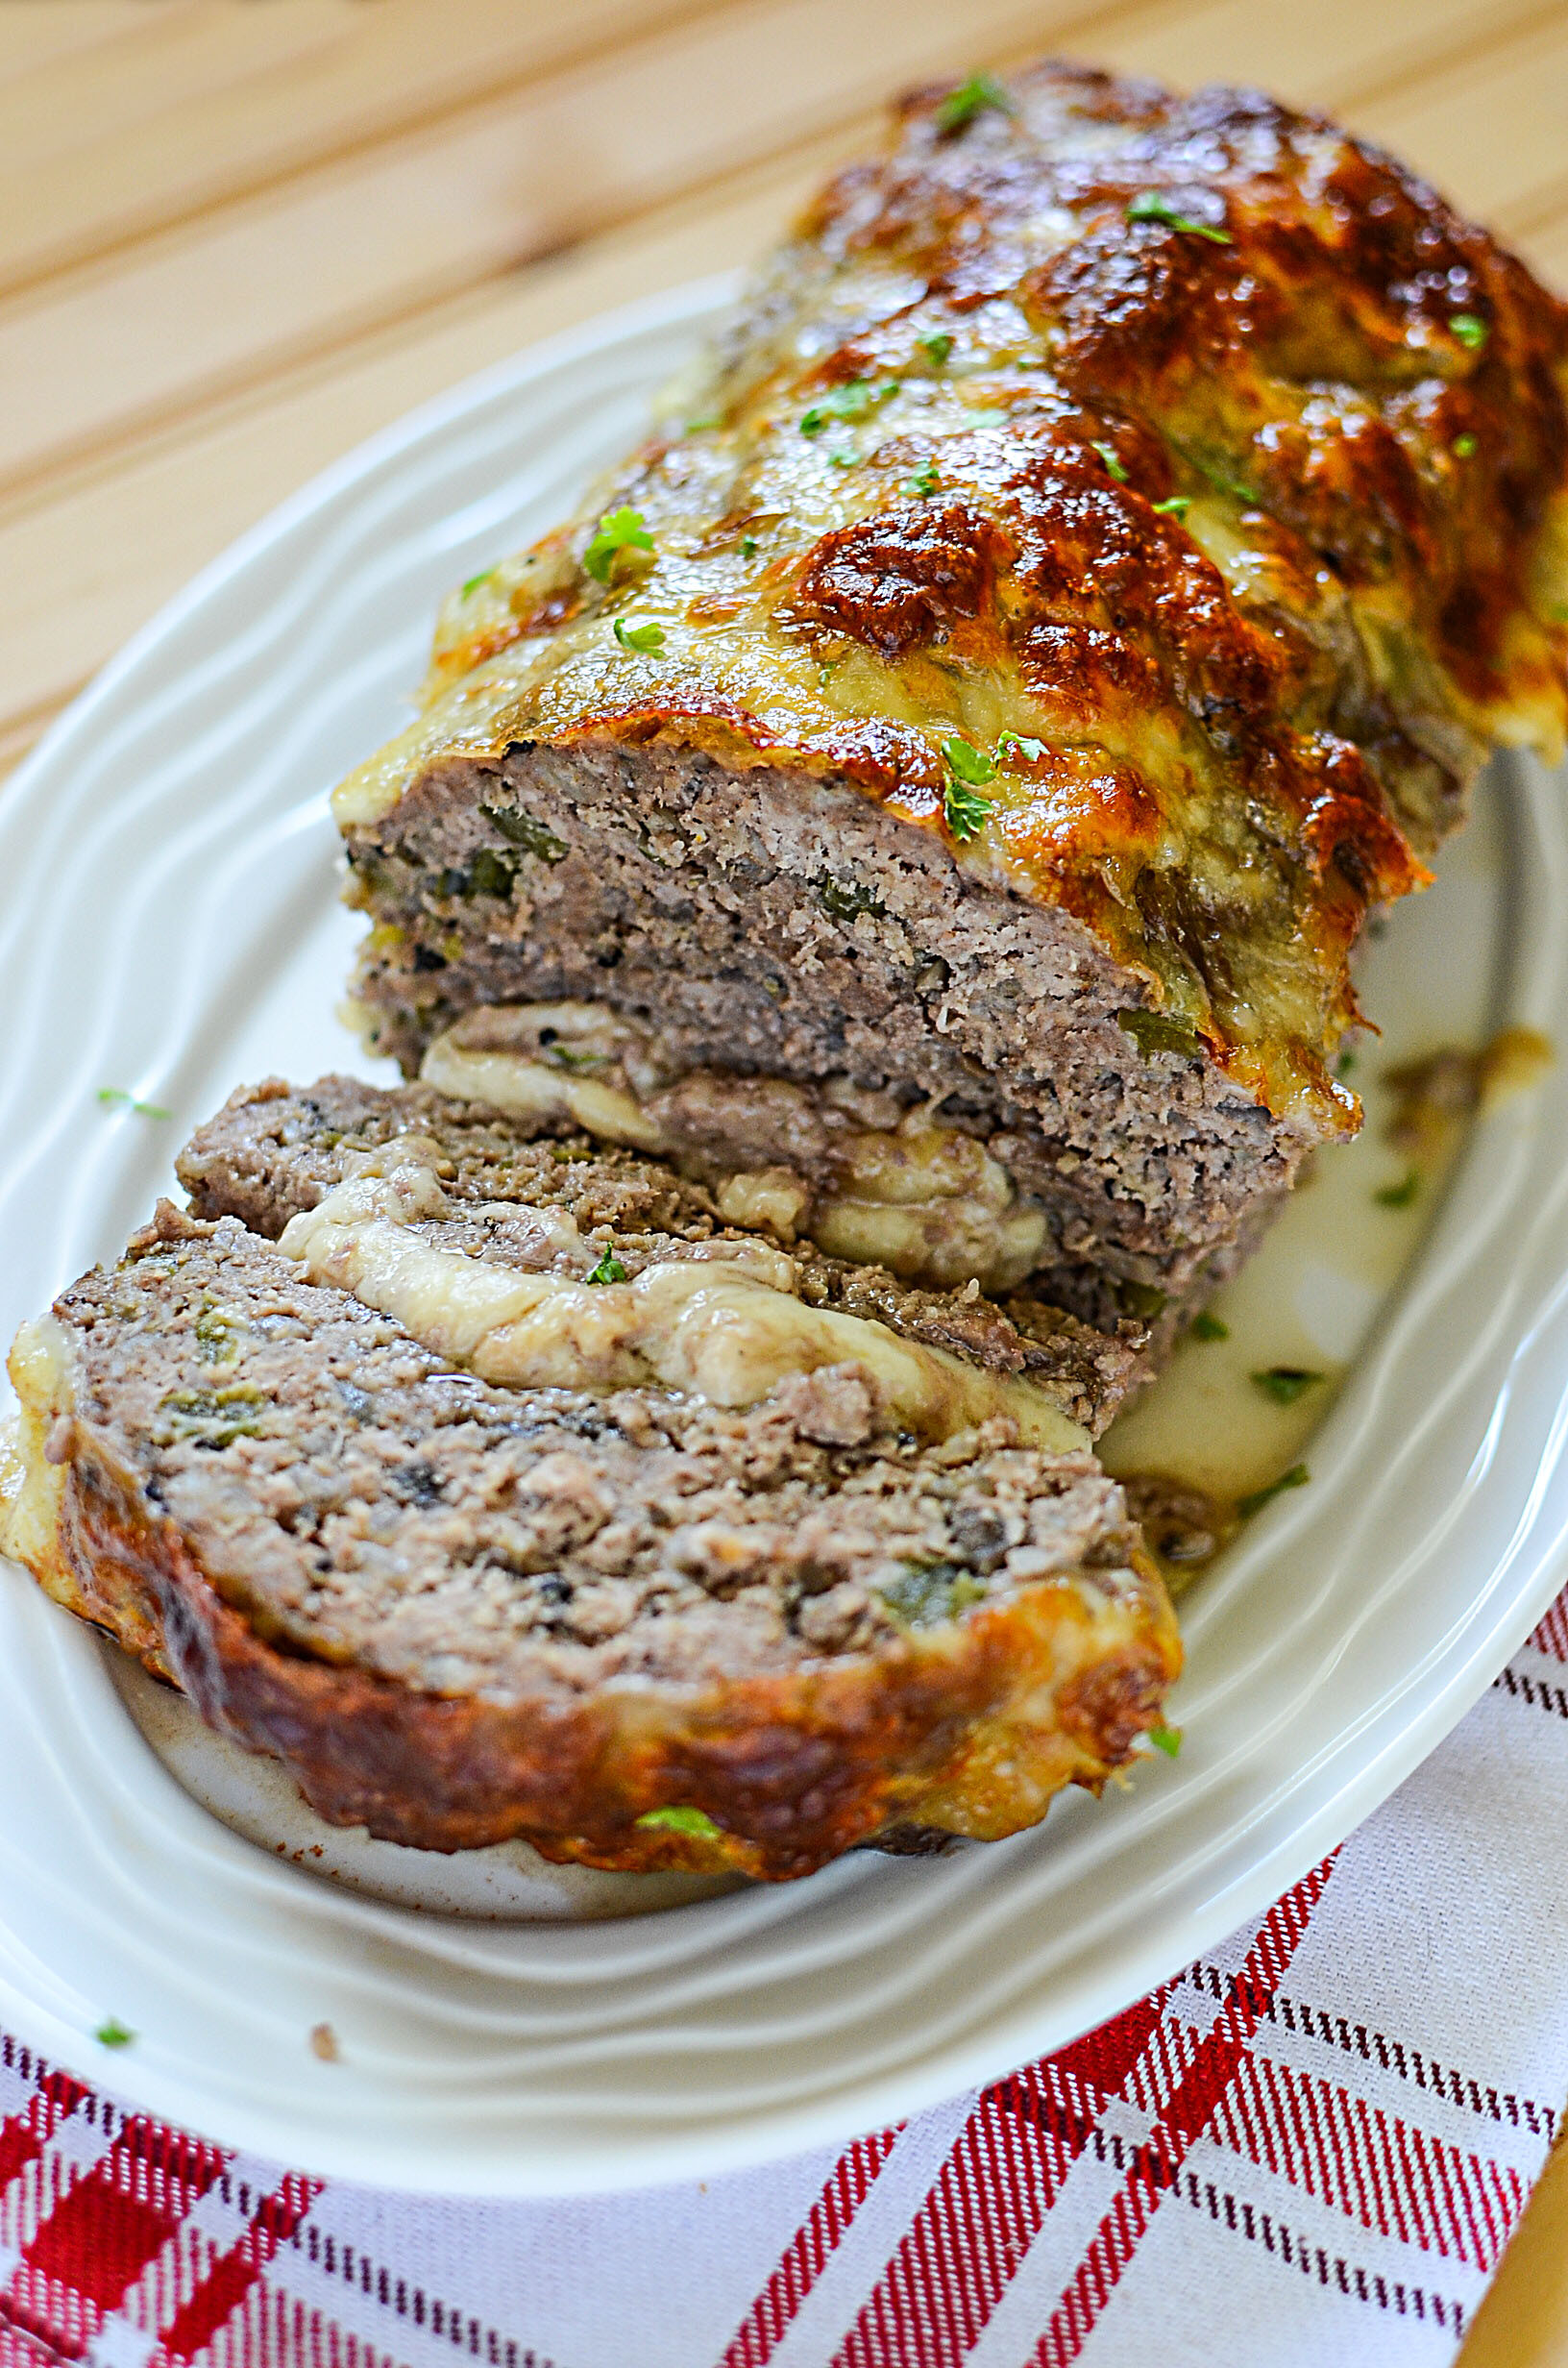 Meatloaf Recipe With Cheese
 Philly Cheesesteak Meatloaf